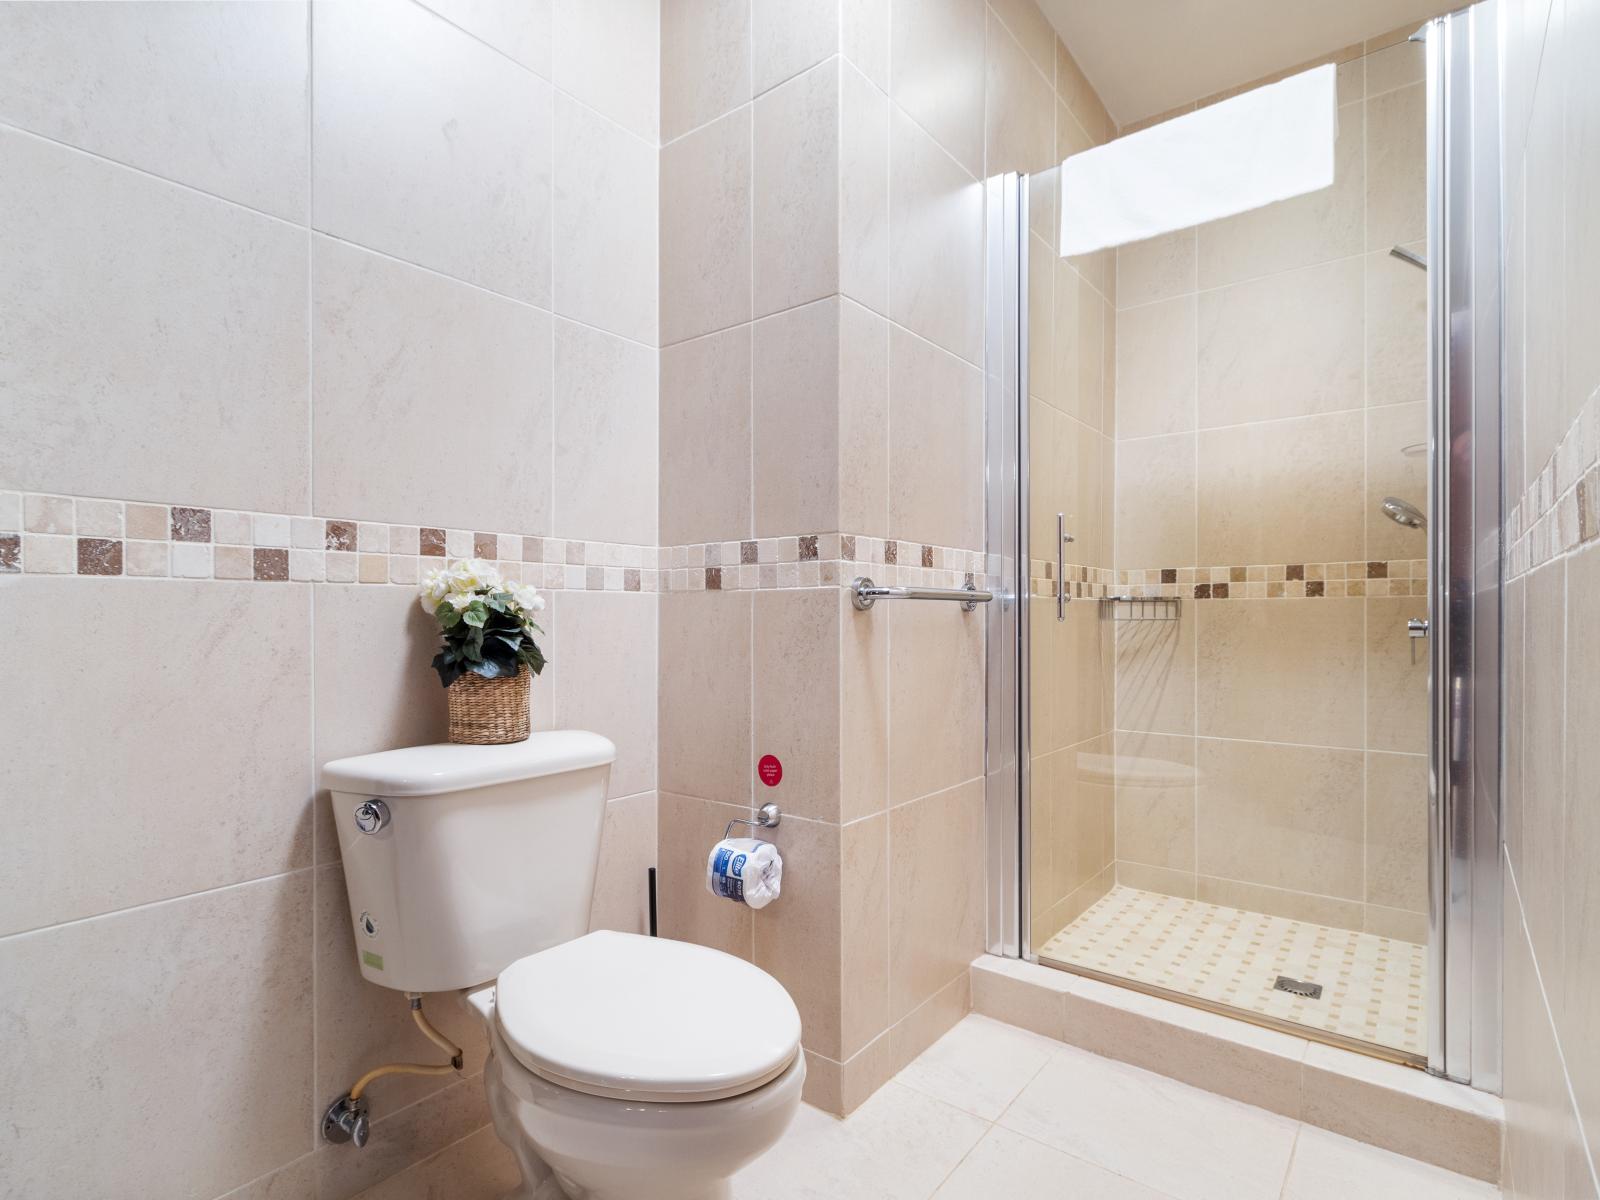 Experience relaxation in the second bedroom's bathroom, complete with a stylish walk-in shower.